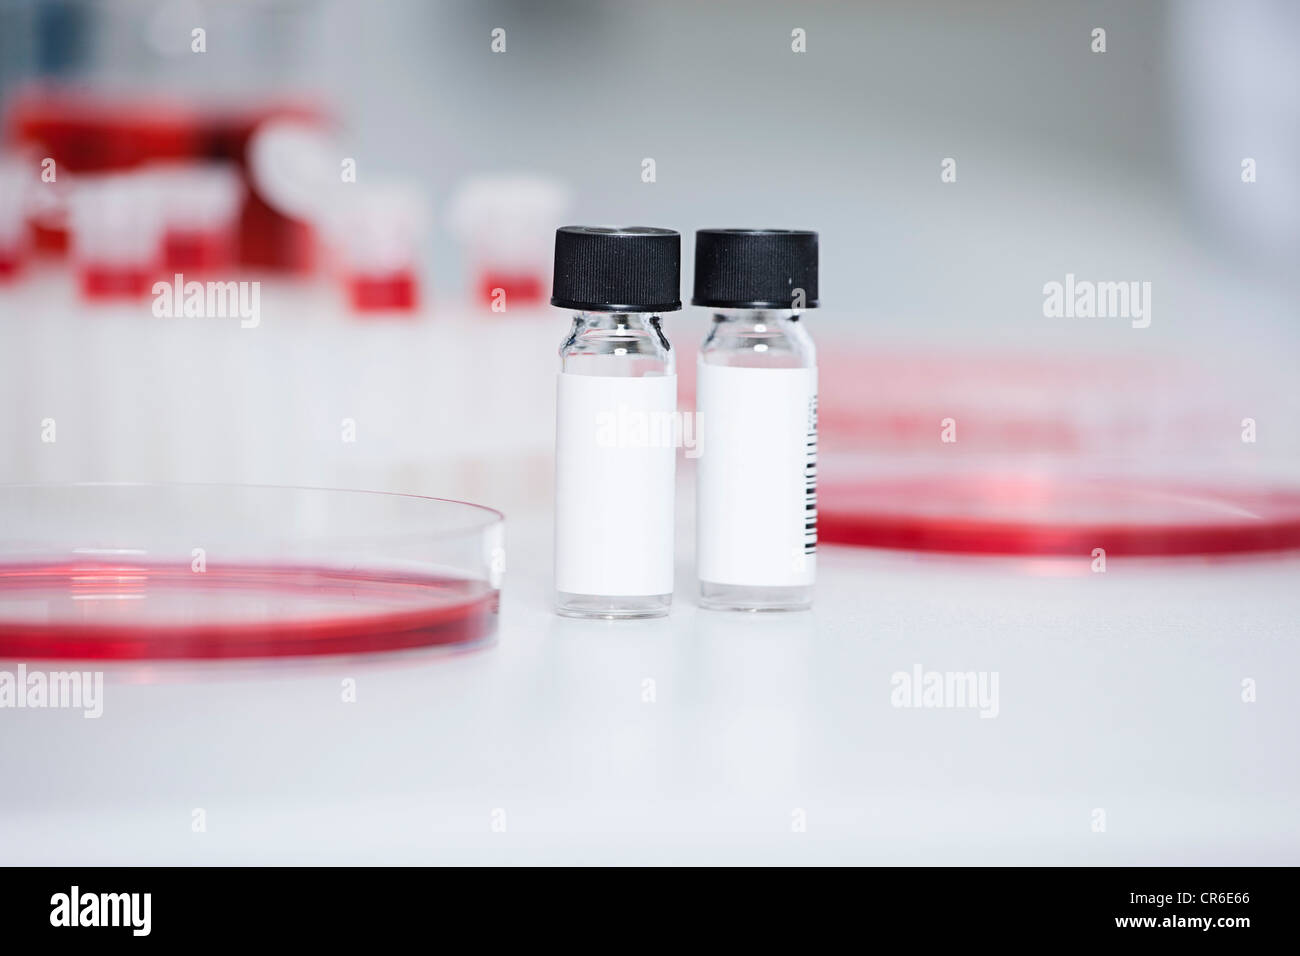 Germany, Bavaria, Munich, Test tubes and petri dishes for medical research in laboratory Stock Photo